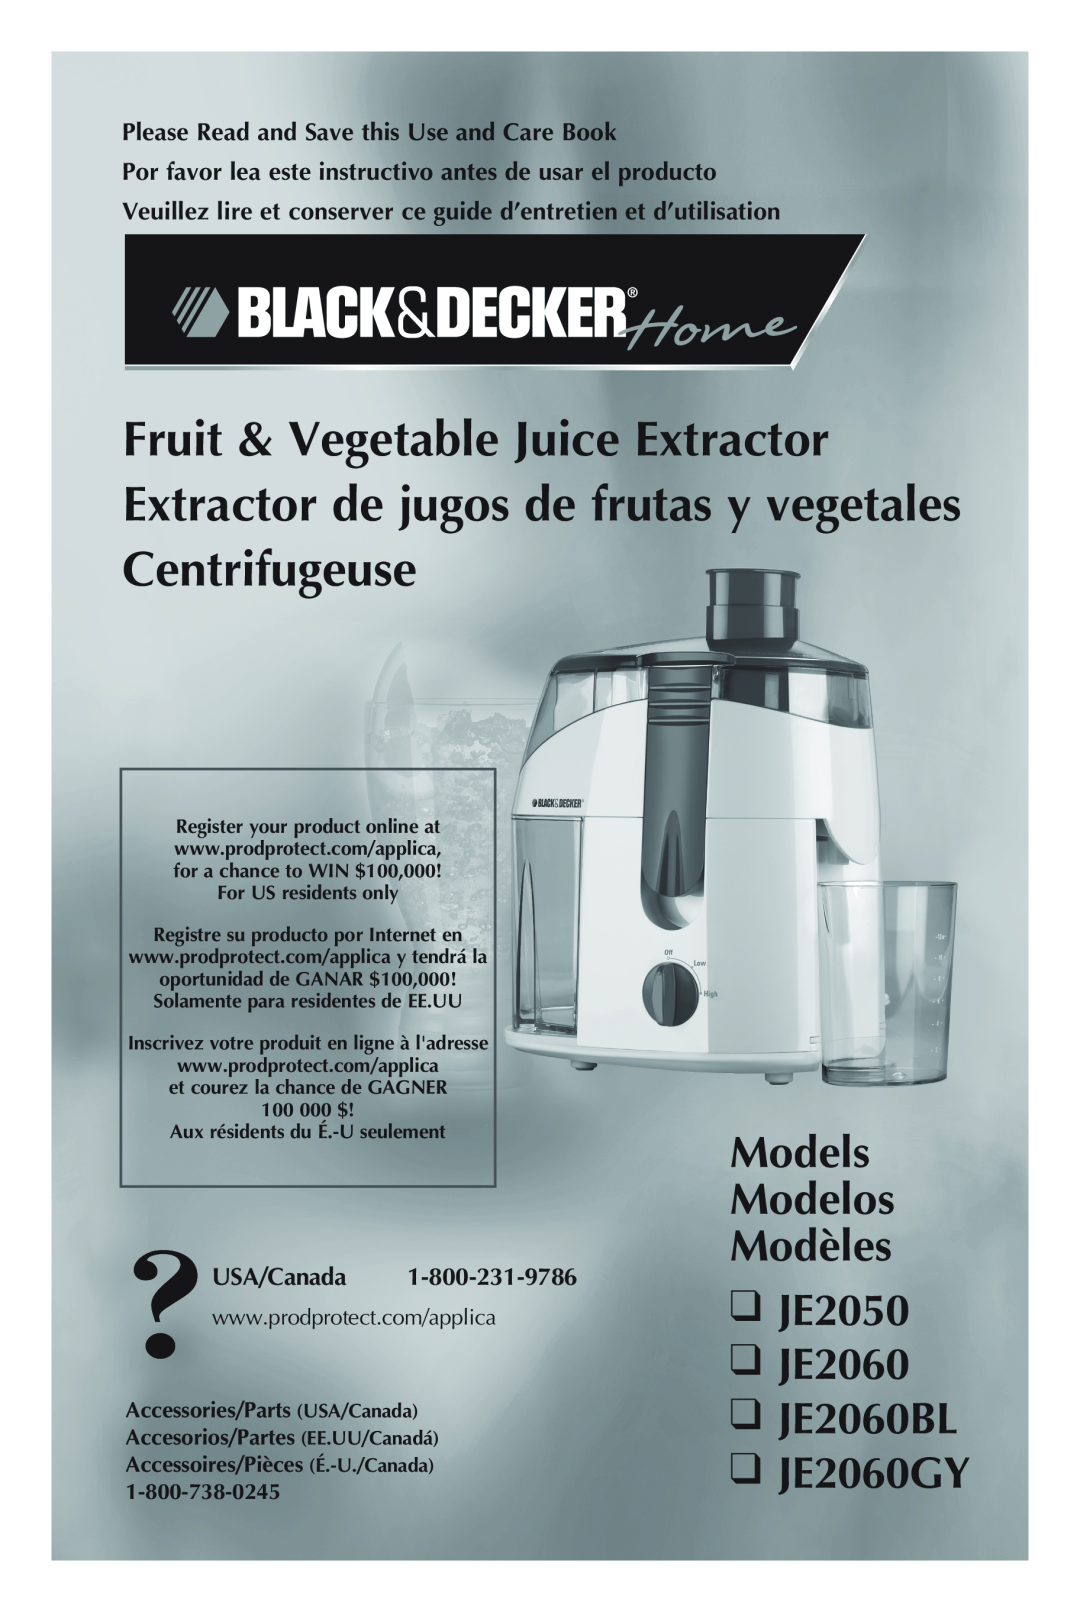 Black & Decker JE2060GY manual Models Modelos Modèles JE2050 JE2060 JE2060BL, Please Read and Save this Use and Care Book 